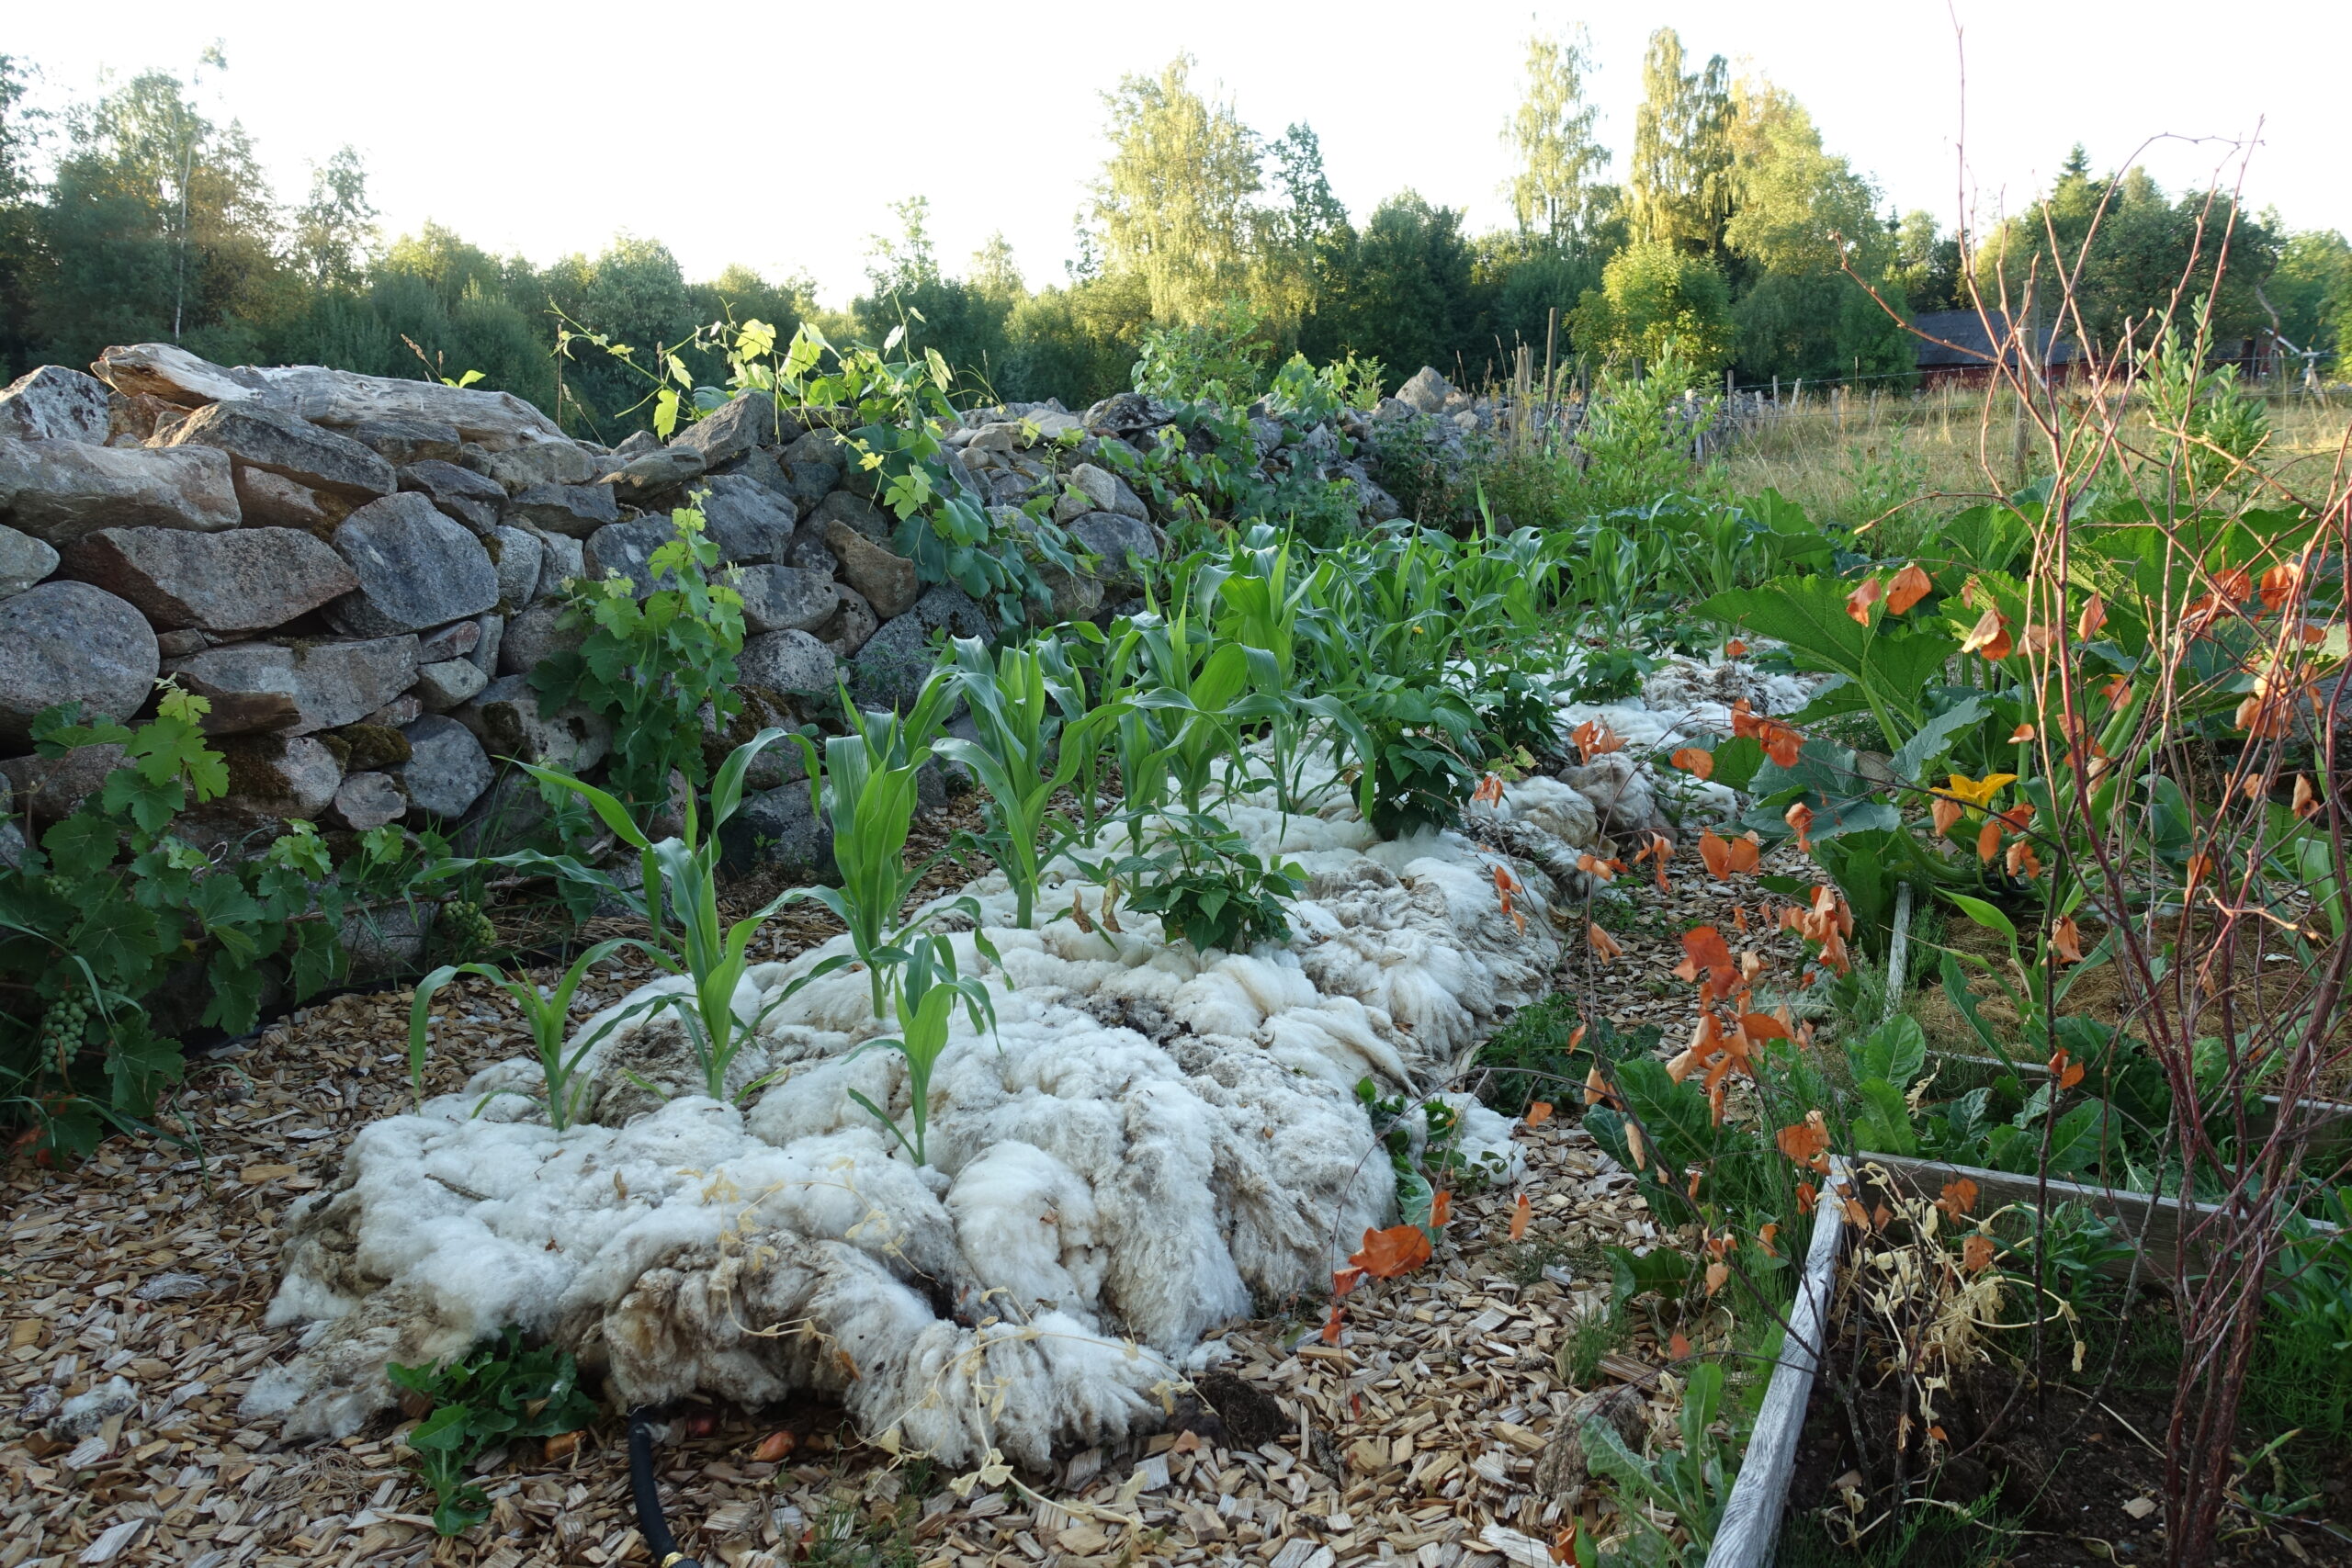 Image of Wool mulch in a garden bed